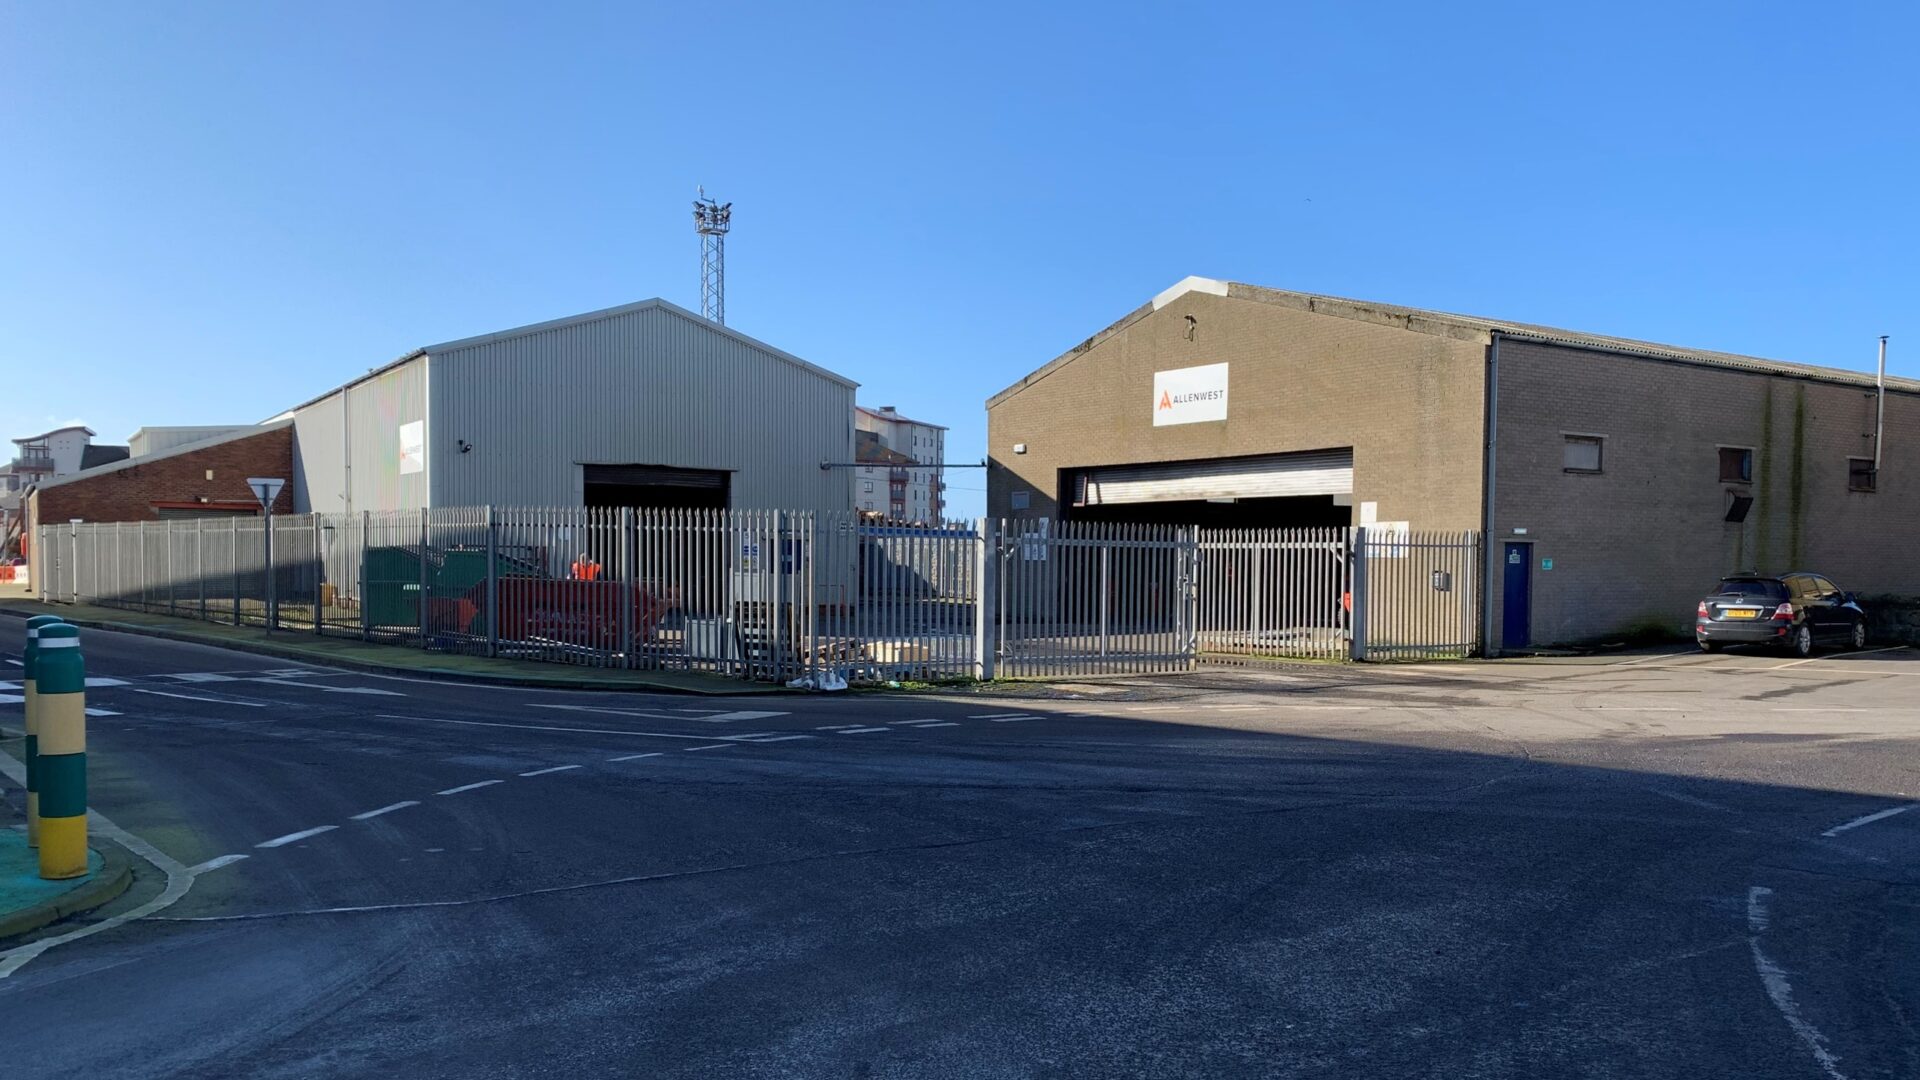 Shepherd markets workshop and office with secure yard in Ayr’s North Harbour area for lease